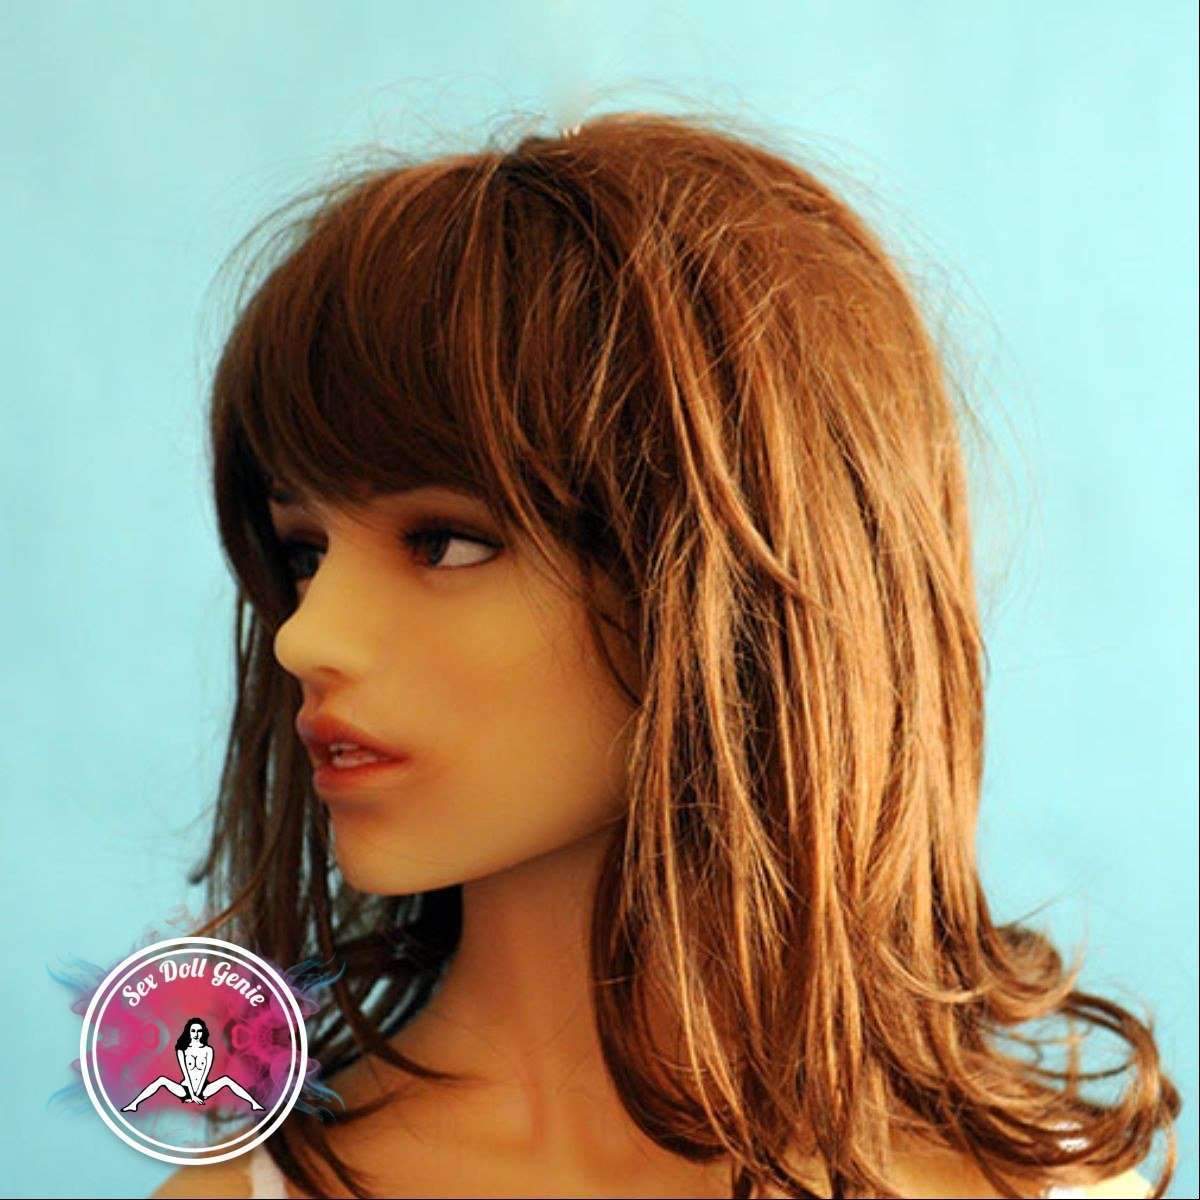 DS Doll - 158cm - Mandy Head - Type 2 D Cup Silicone Doll-22